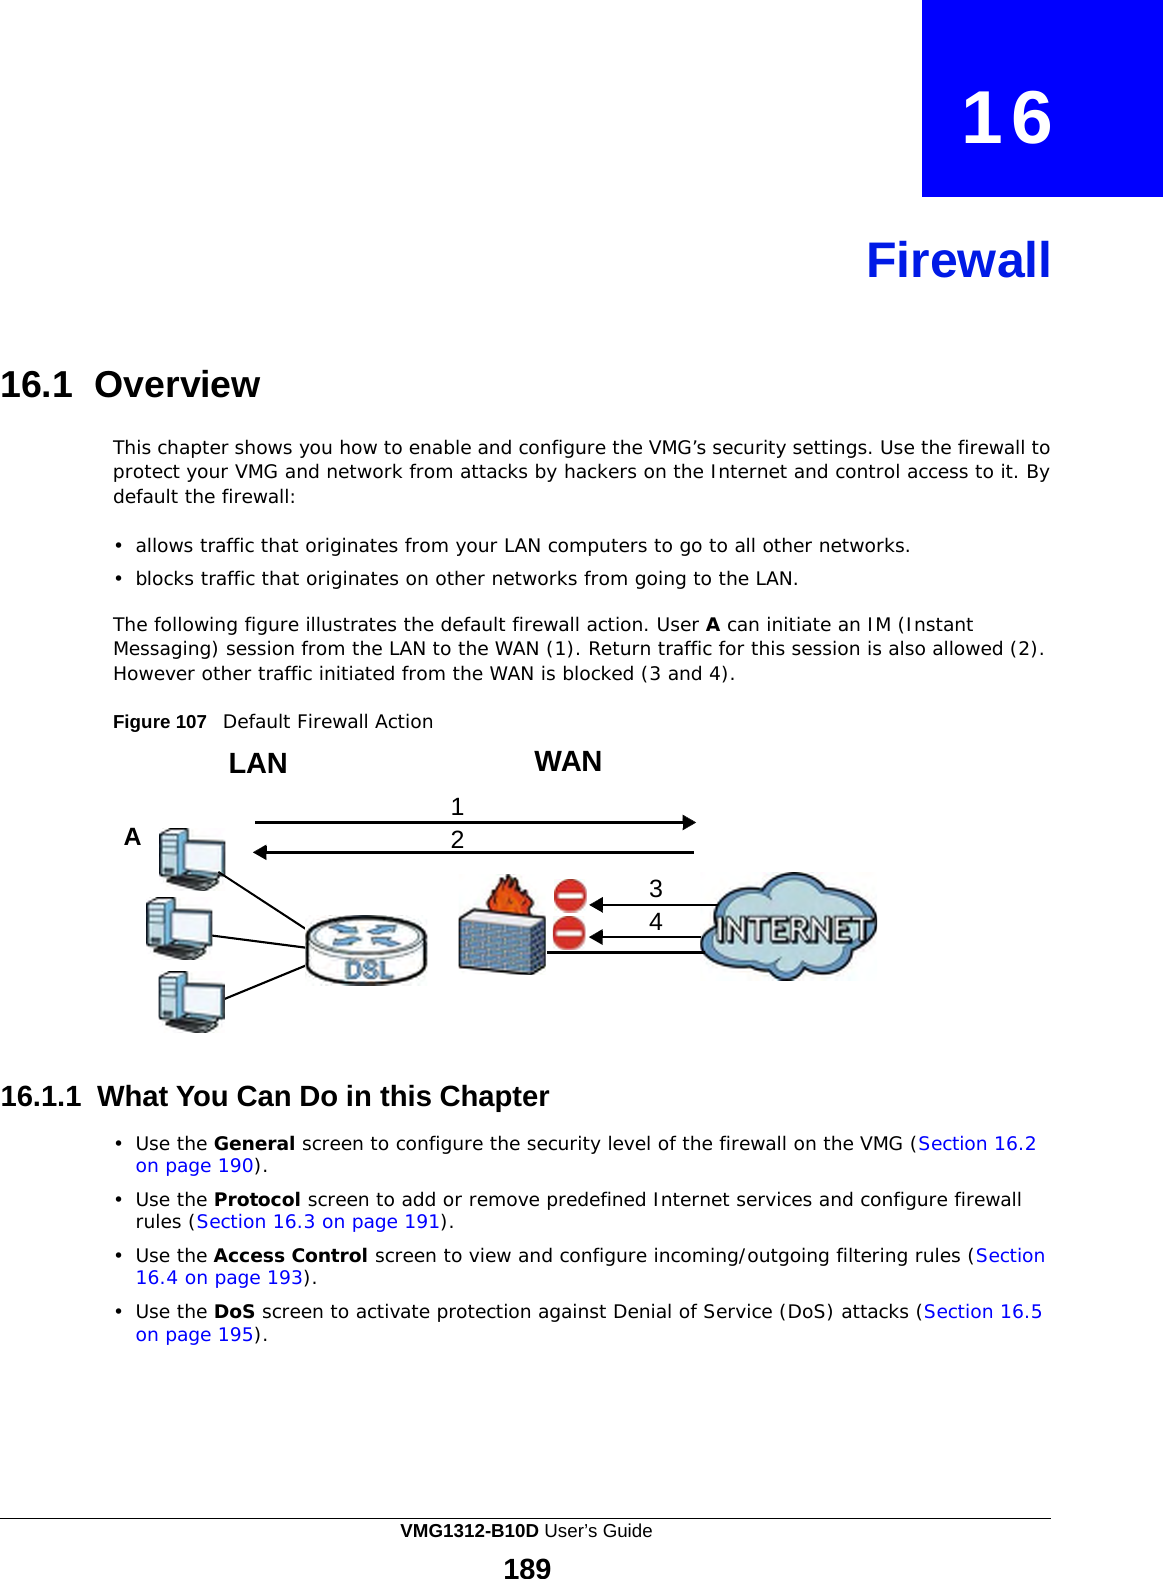                  16     Firewall     16.1 Overview  This chapter shows you how to enable and configure the VMG’s security settings. Use the firewall to protect your VMG and network from attacks by hackers on the Internet and control access to it. By default the firewall:  •  allows traffic that originates from your LAN computers to go to all other networks.  •  blocks traffic that originates on other networks from going to the LAN.  The following figure illustrates the default firewall action. User A can initiate an IM (Instant Messaging) session from the LAN to the WAN (1). Return traffic for this session is also allowed (2). However other traffic initiated from the WAN is blocked (3 and 4).  Figure 107   Default Firewall Action  LAN  1 A  2   WAN      3 4        16.1.1 What You Can Do in this Chapter  •  Use the General screen to configure the security level of the firewall on the VMG (Section 16.2 on page 190).  •  Use the Protocol screen to add or remove predefined Internet services and configure firewall rules (Section 16.3 on page 191).  •  Use the Access Control screen to view and configure incoming/outgoing filtering rules (Section 16.4 on page 193).  •  Use the DoS screen to activate protection against Denial of Service (DoS) attacks (Section 16.5 on page 195). VMG1312-B10D User’s Guide 189  